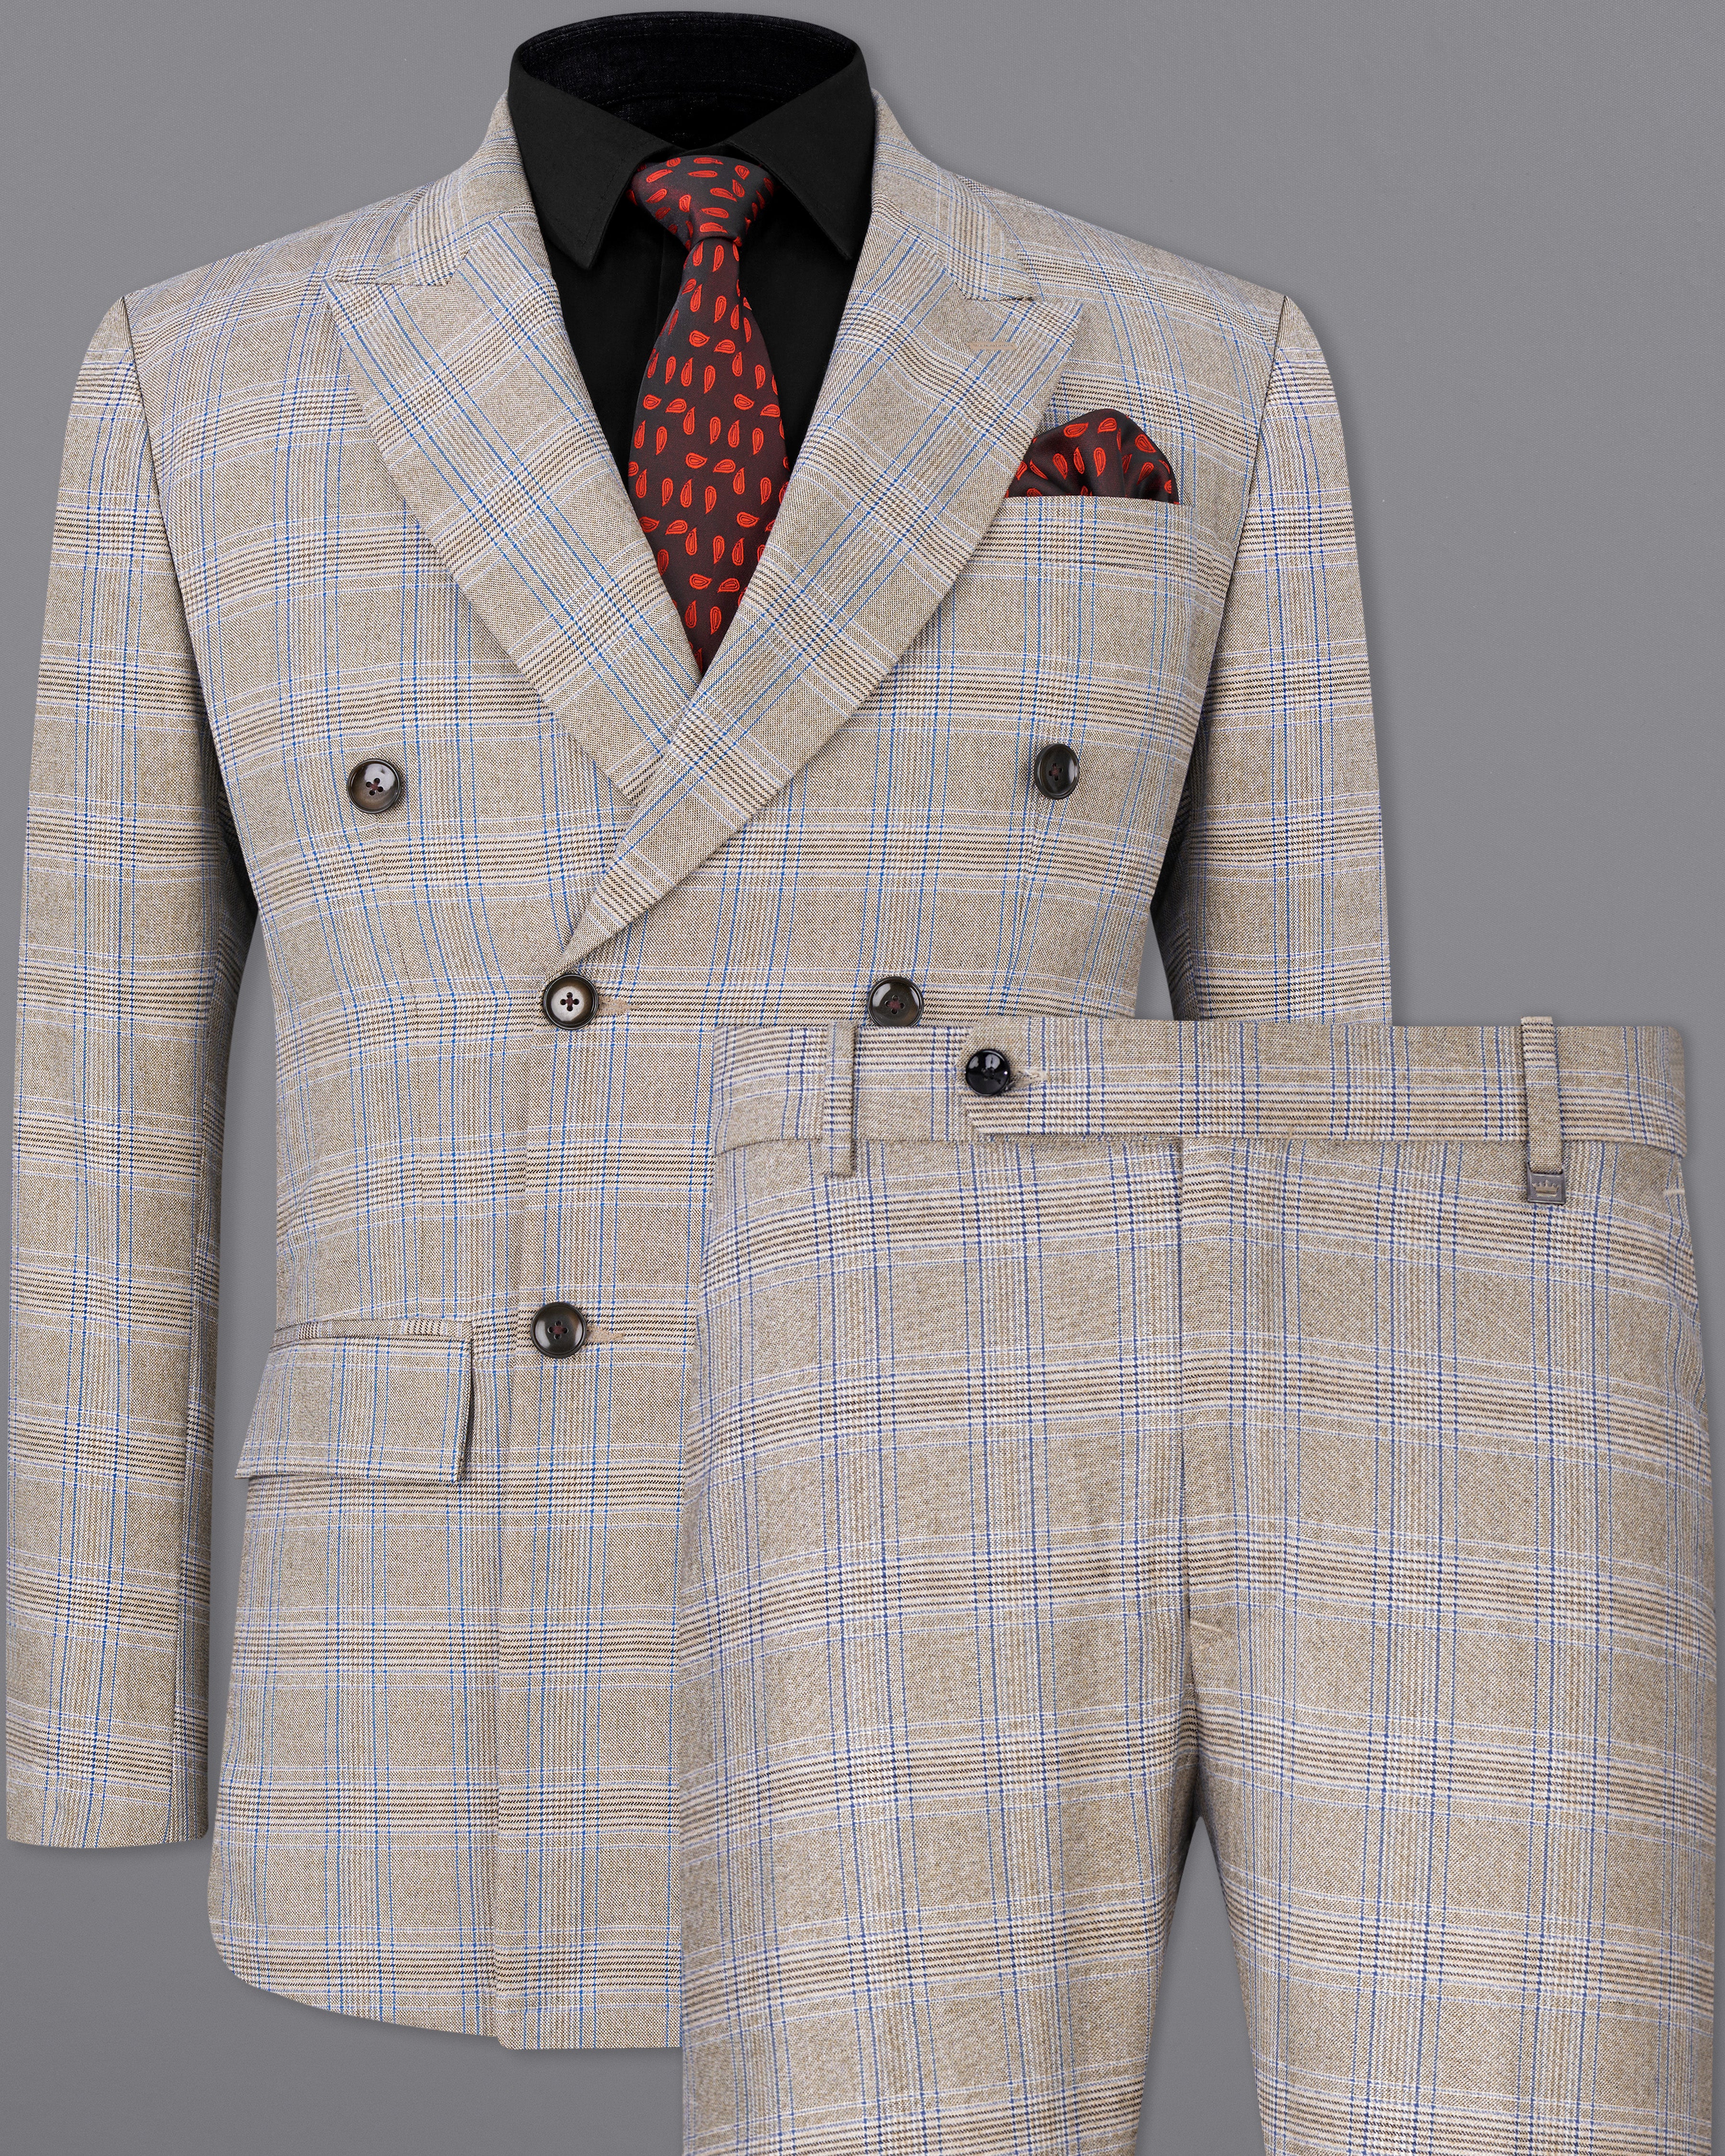 Sandrift Brown with Persian Blue Plaid Double Breasted Suit ST2513-DB-36, ST2513-DB-38, ST2513-DB-40, ST2513-DB-42, ST2513-DB-44, ST2513-DB-46, ST2513-DB-48, ST2513-DB-50, ST2513-DB-52, ST2513-DB-54, ST2513-DB-56, ST2513-DB-58, ST2513-DB-60